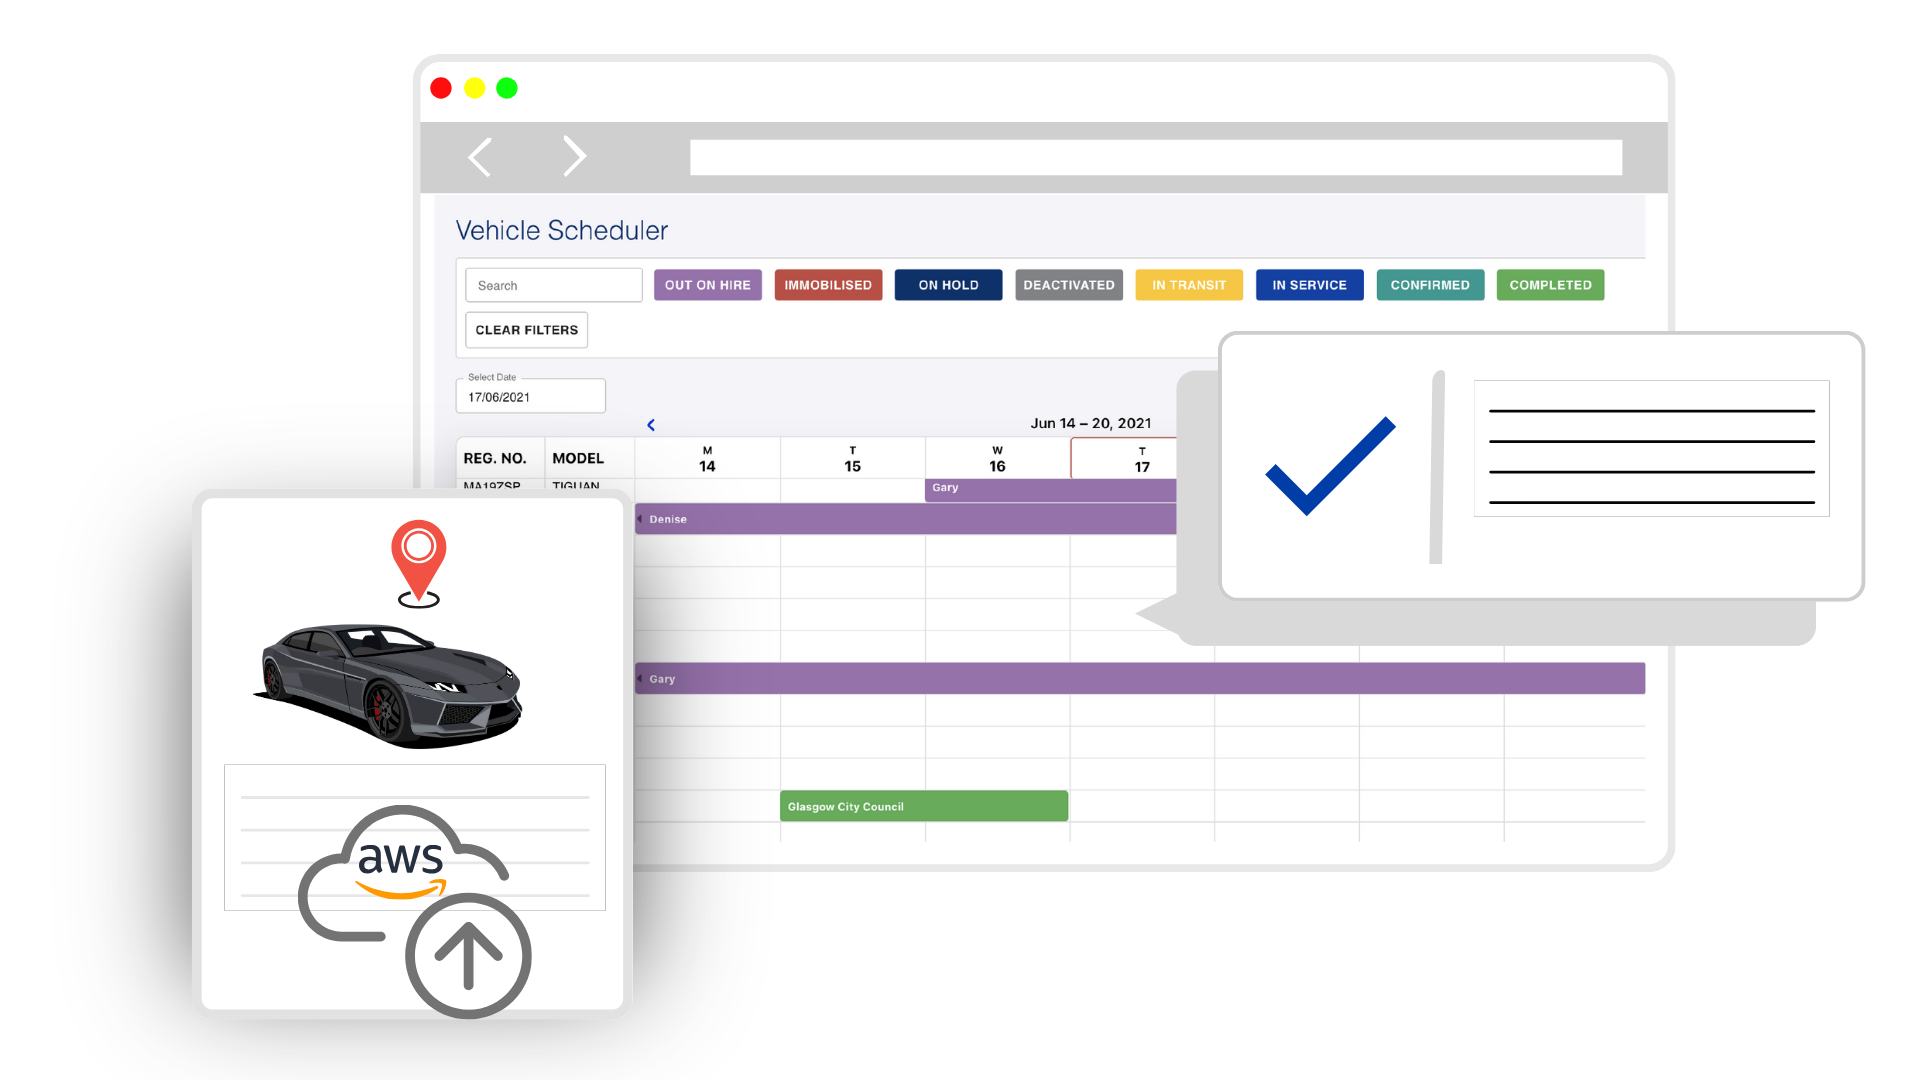 Automated Fleet Scheduling - Connect Real Time Availability to improve utilisation and revenue